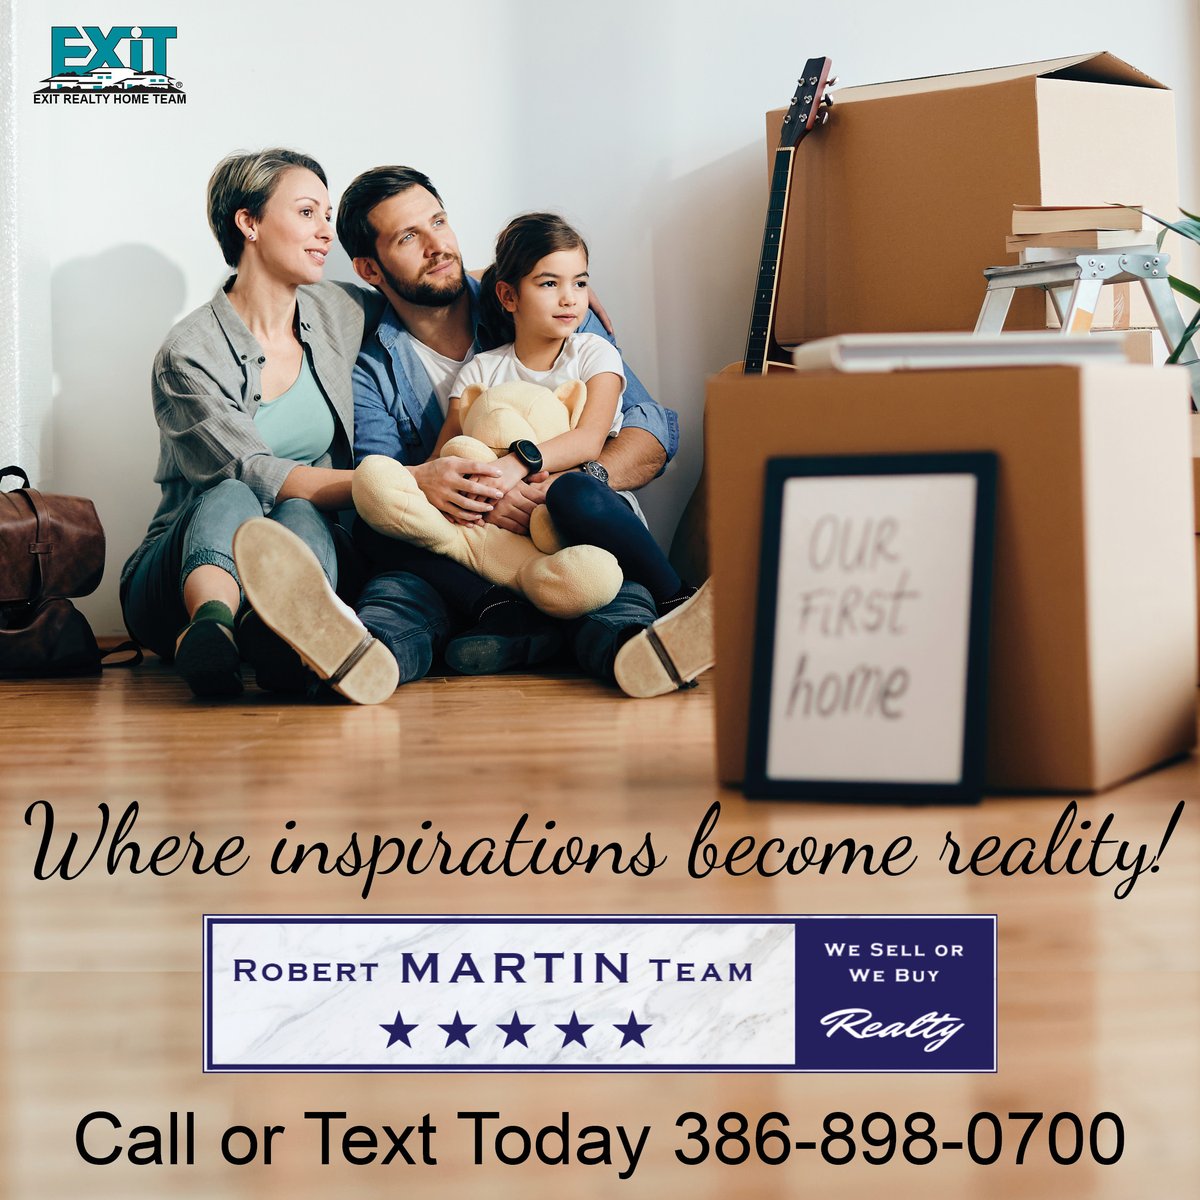 EXIT Realty Home Team - where inspirations become reality!
Call or text 386-898-0700 today - we're ready to get to work for you.

#EXITRealtyHomeTeam #DaytonaBeachHomes #DaytonaBeaachRealEstate #HomesForSale #LuxuryHomes #WaterfrontHomes #LovEXIT #EXITRealty #curbappeal...